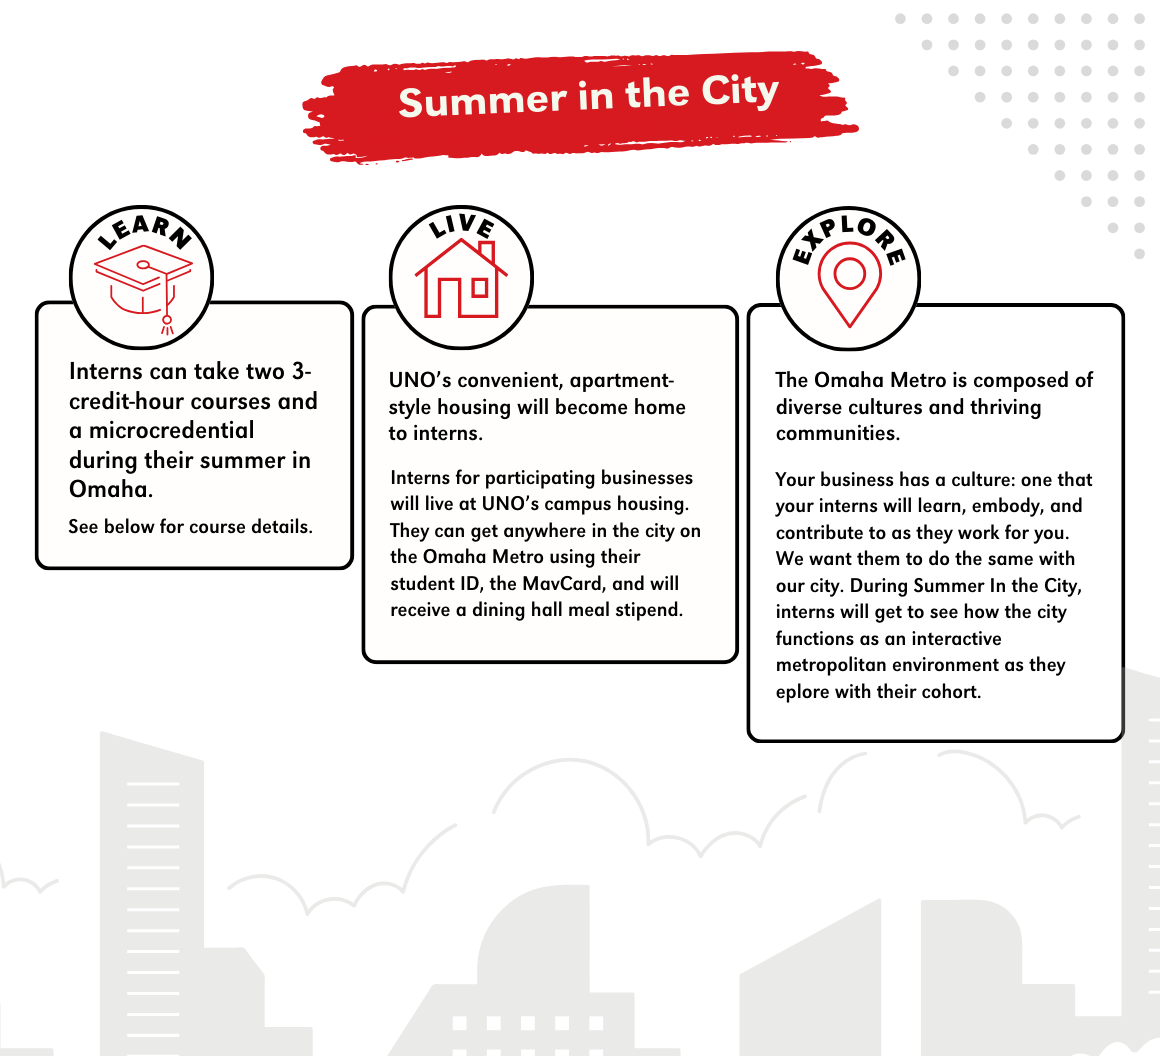 Summer in the city learn, live, explore objectives